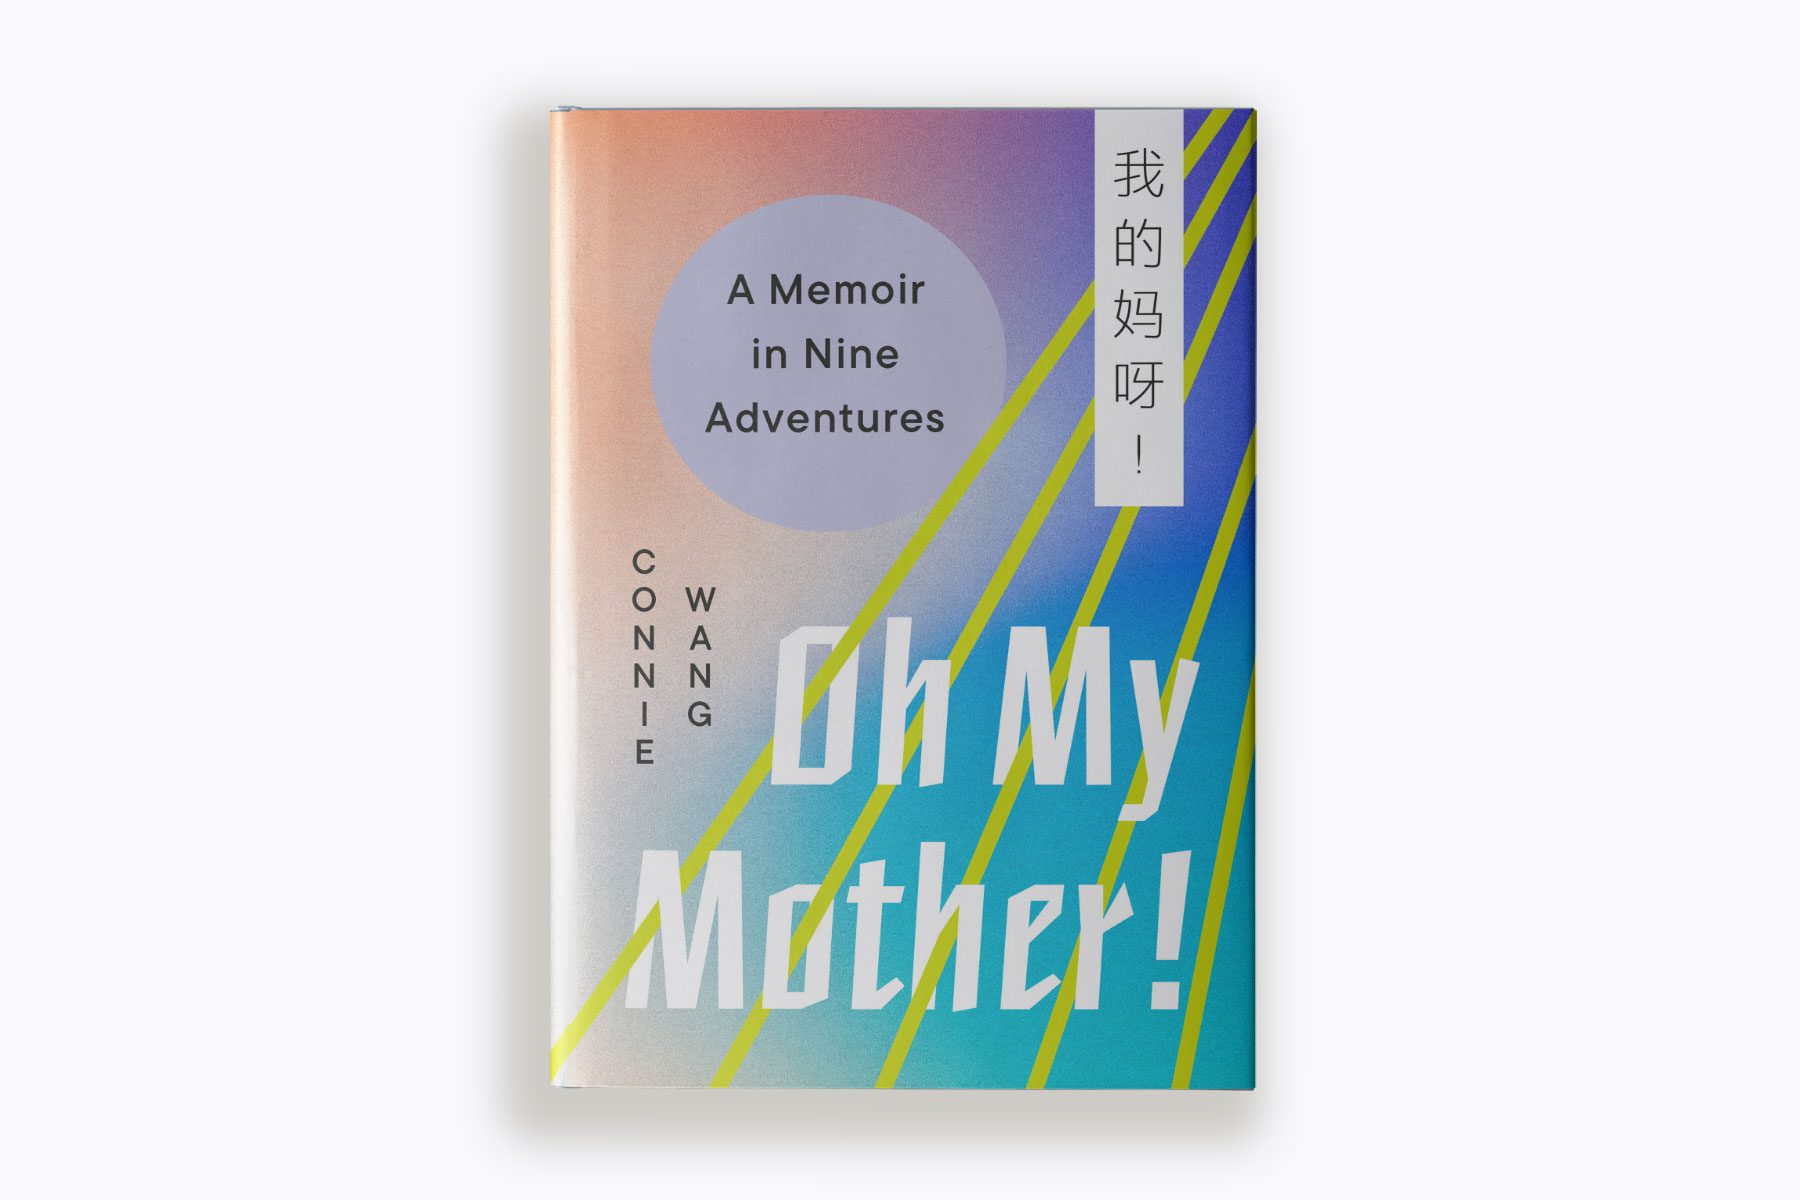 A photo illustration of the "Oh My Mother!" book cover